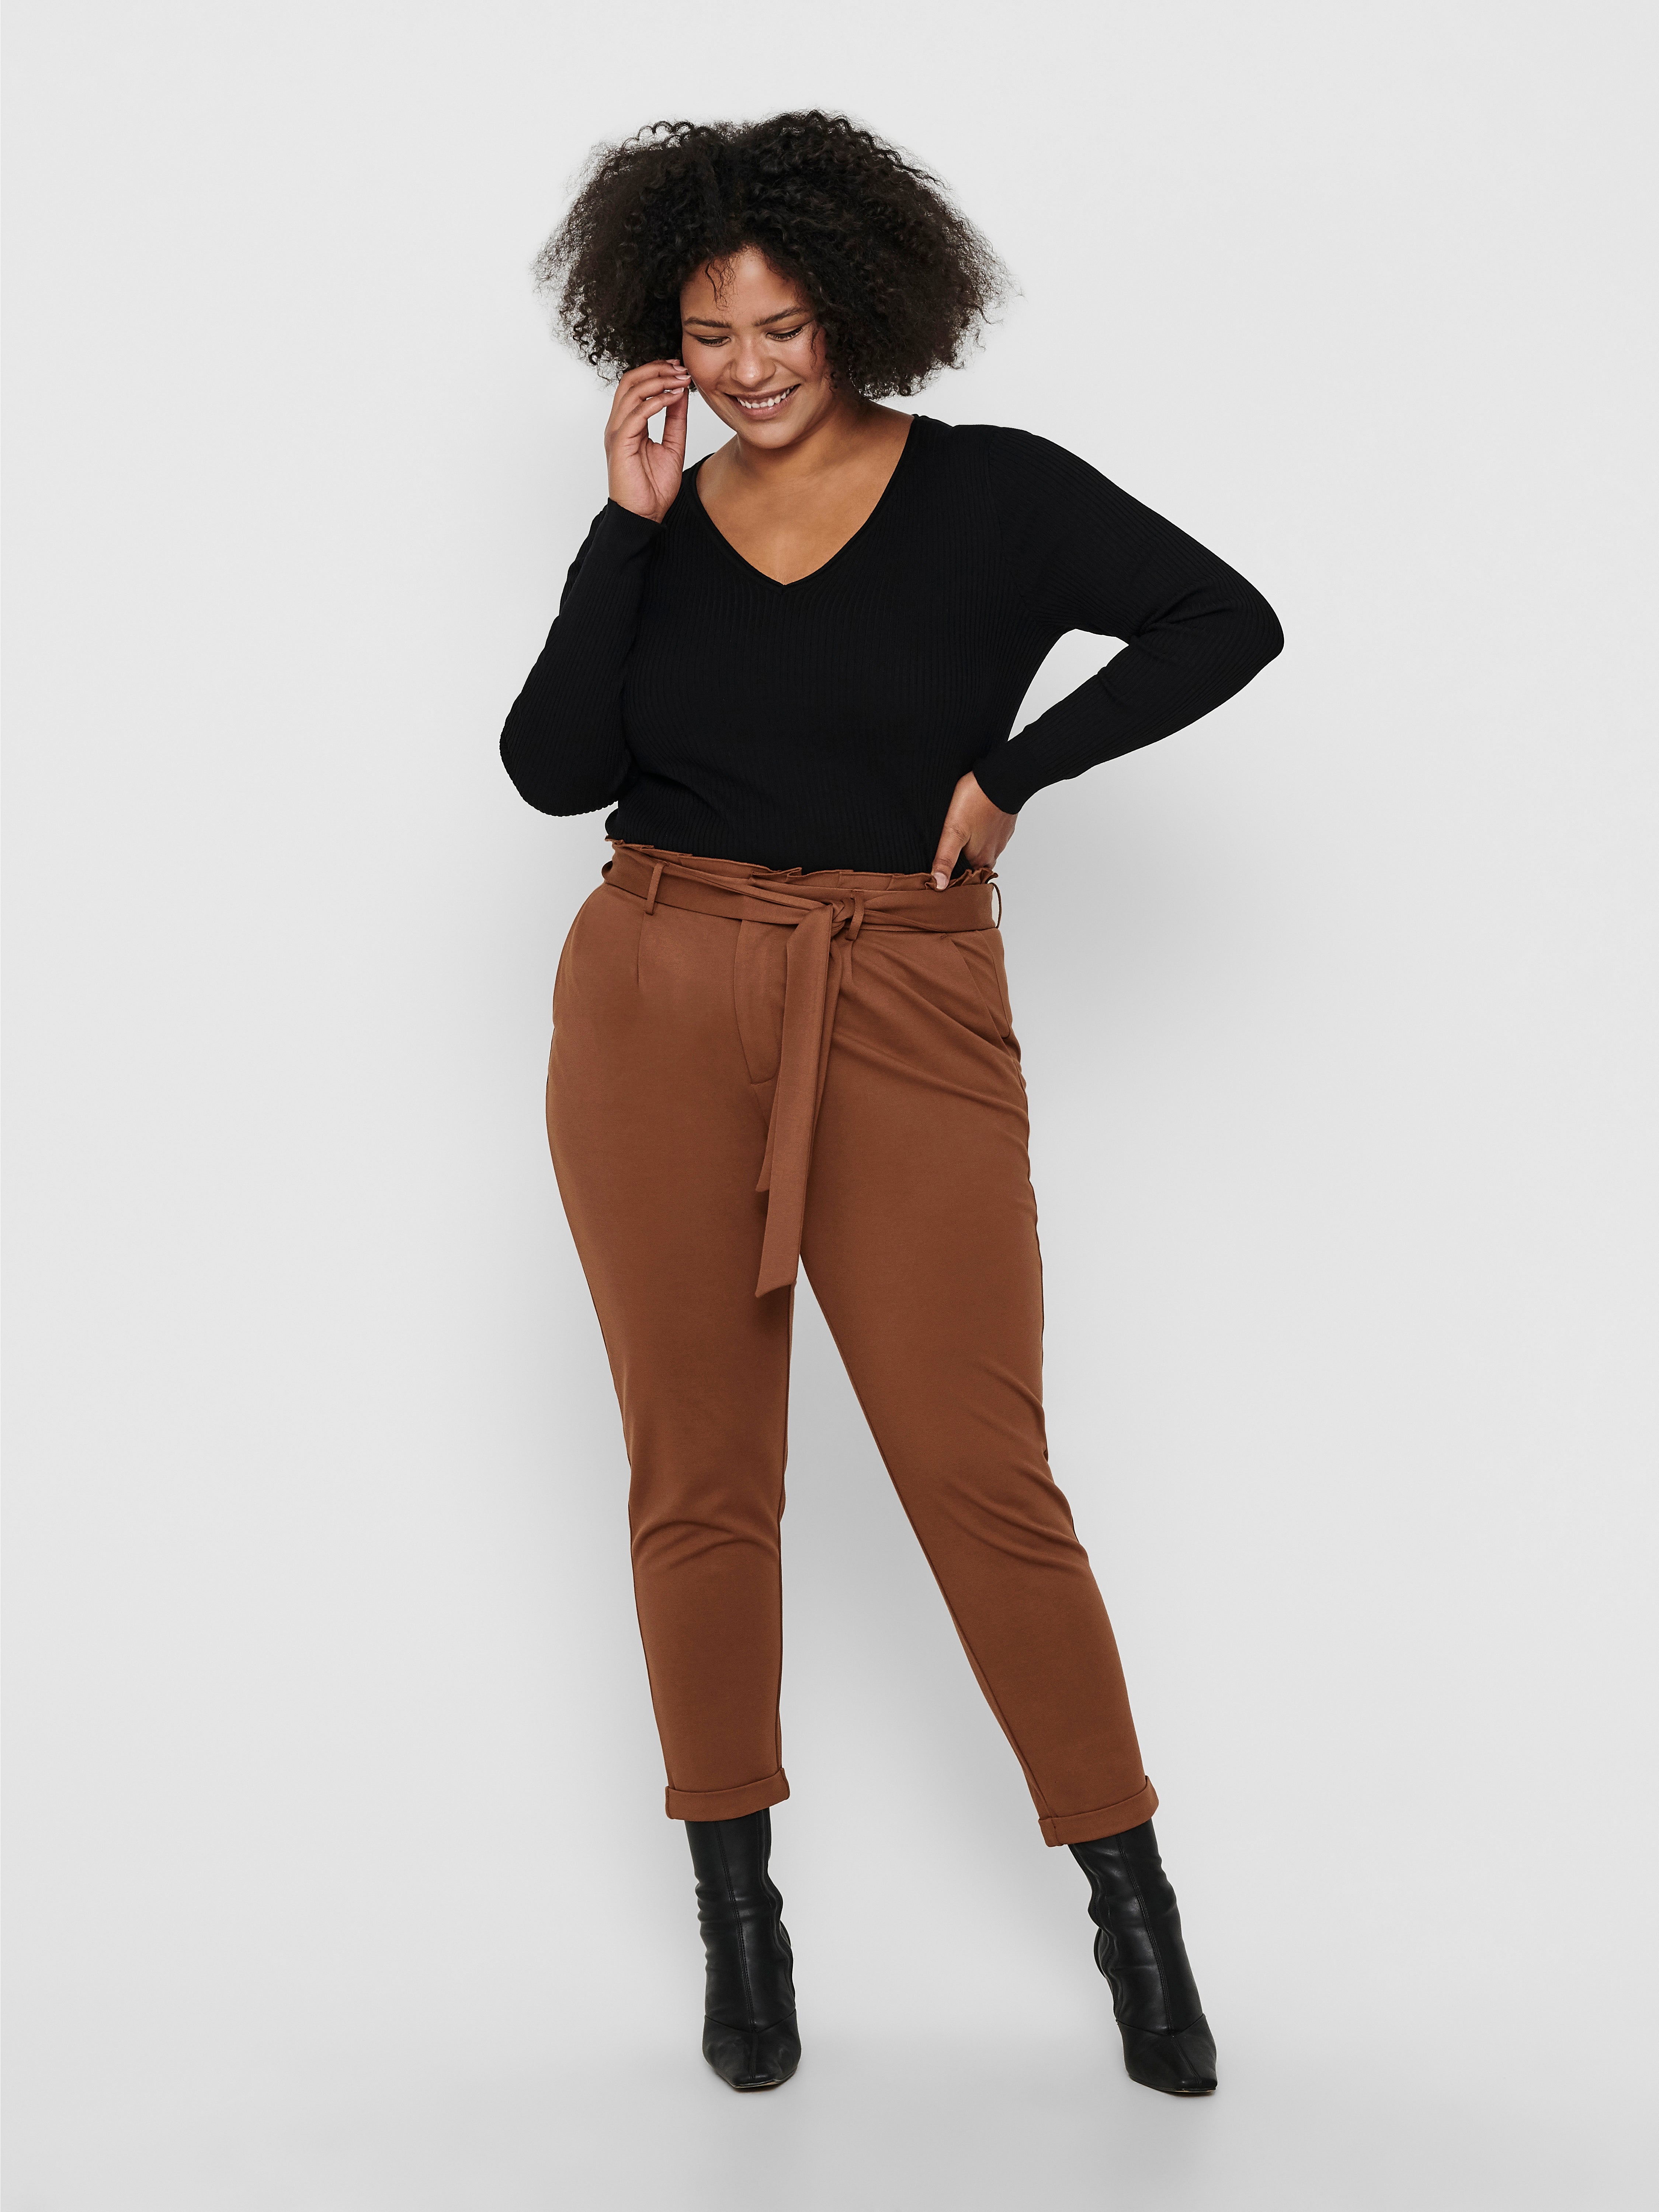 14 Ridiculously Comfortable Paper Bag Waist Pants For Every Size  HuffPost  Life